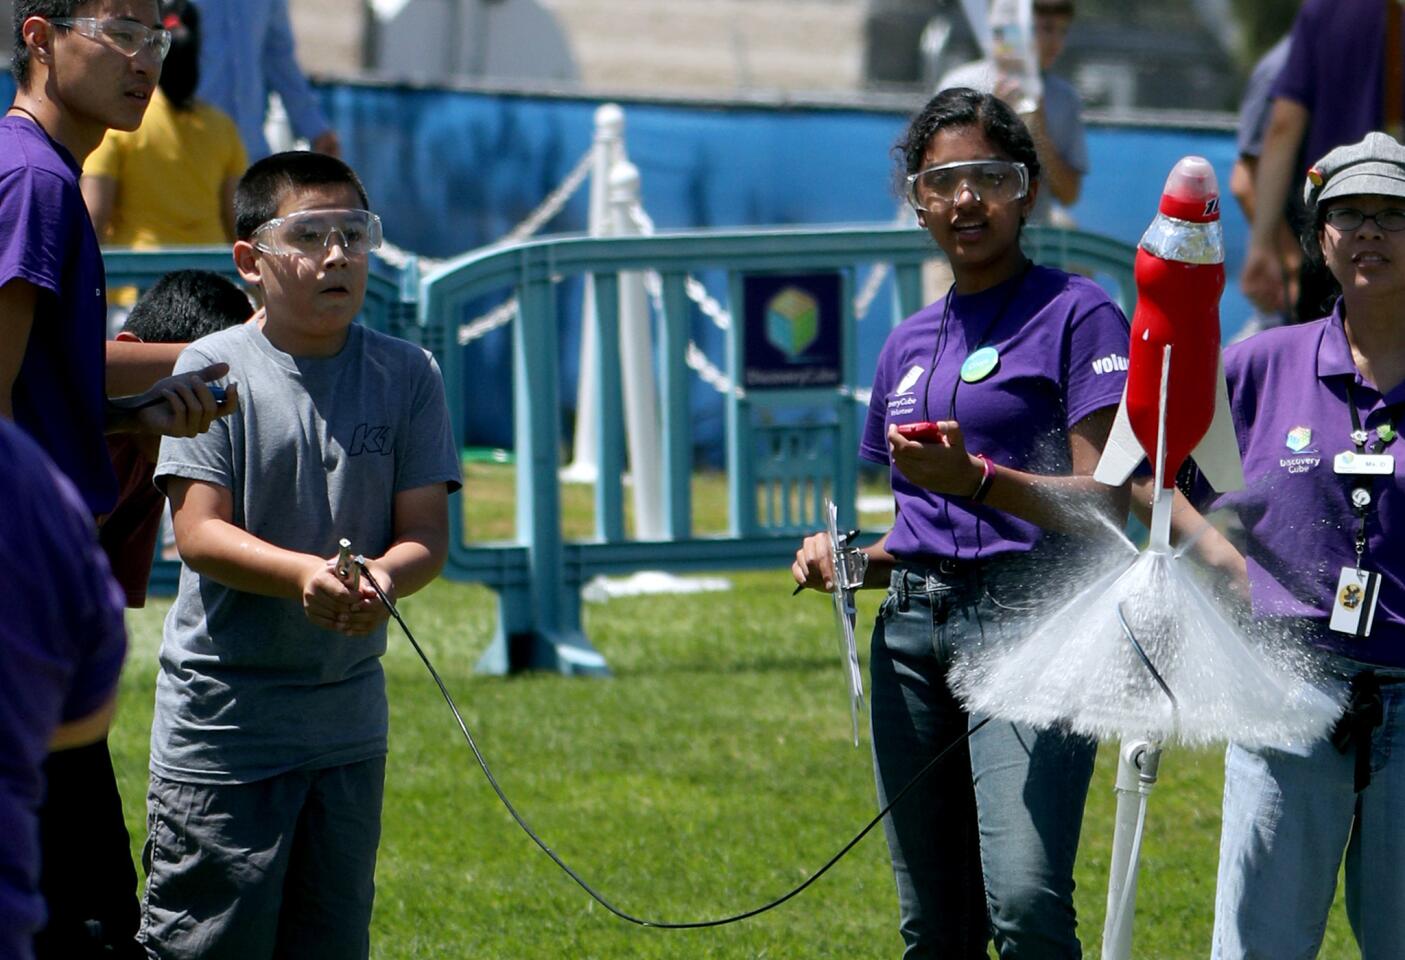 Alex Villasenor, 11 of Santa Ana, launches a water-propelled rocket made by his friend Adrian Padilla, 12 of Costa Mesa, at the annual Discovery Cube Rocket Launch event at the Boeing Company, in Huntington Beach on Saturday, May 11, 2019.